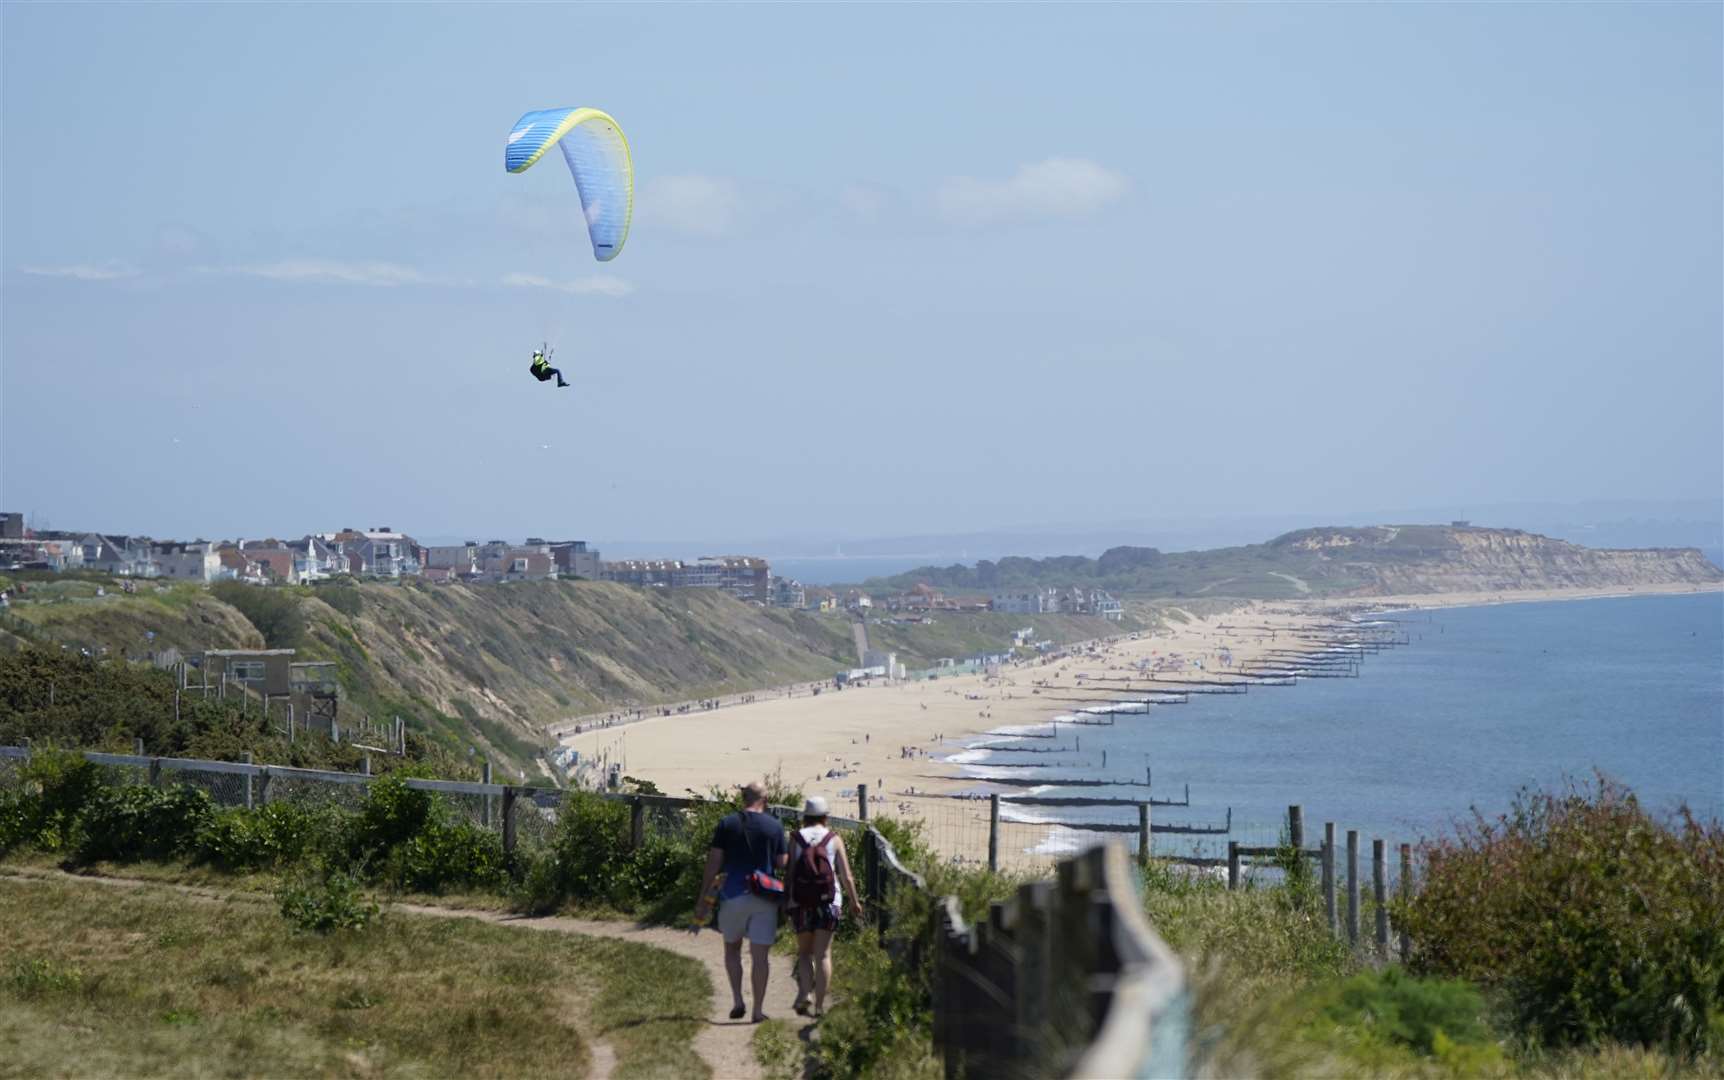 Further along the coast at Boscombe beach, a paraglider takes to the skies above the cliffs (Andrew Matthews/PA)